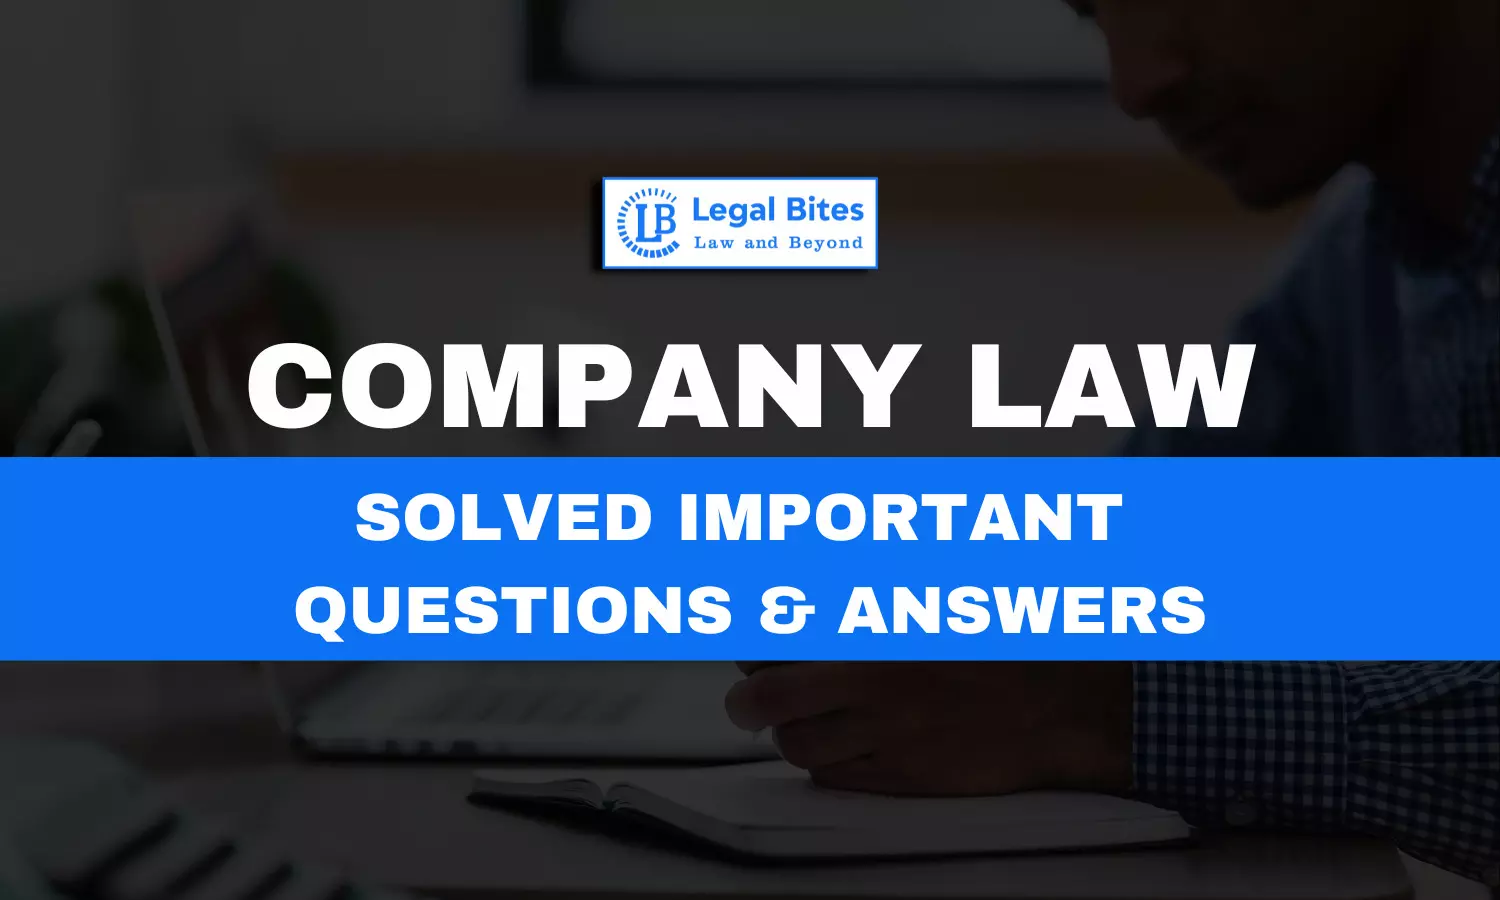 Discuss the composition of the National Company Law Tribunal (NCLT). Critically examine the status and powers of the National Company Law Tribunal.